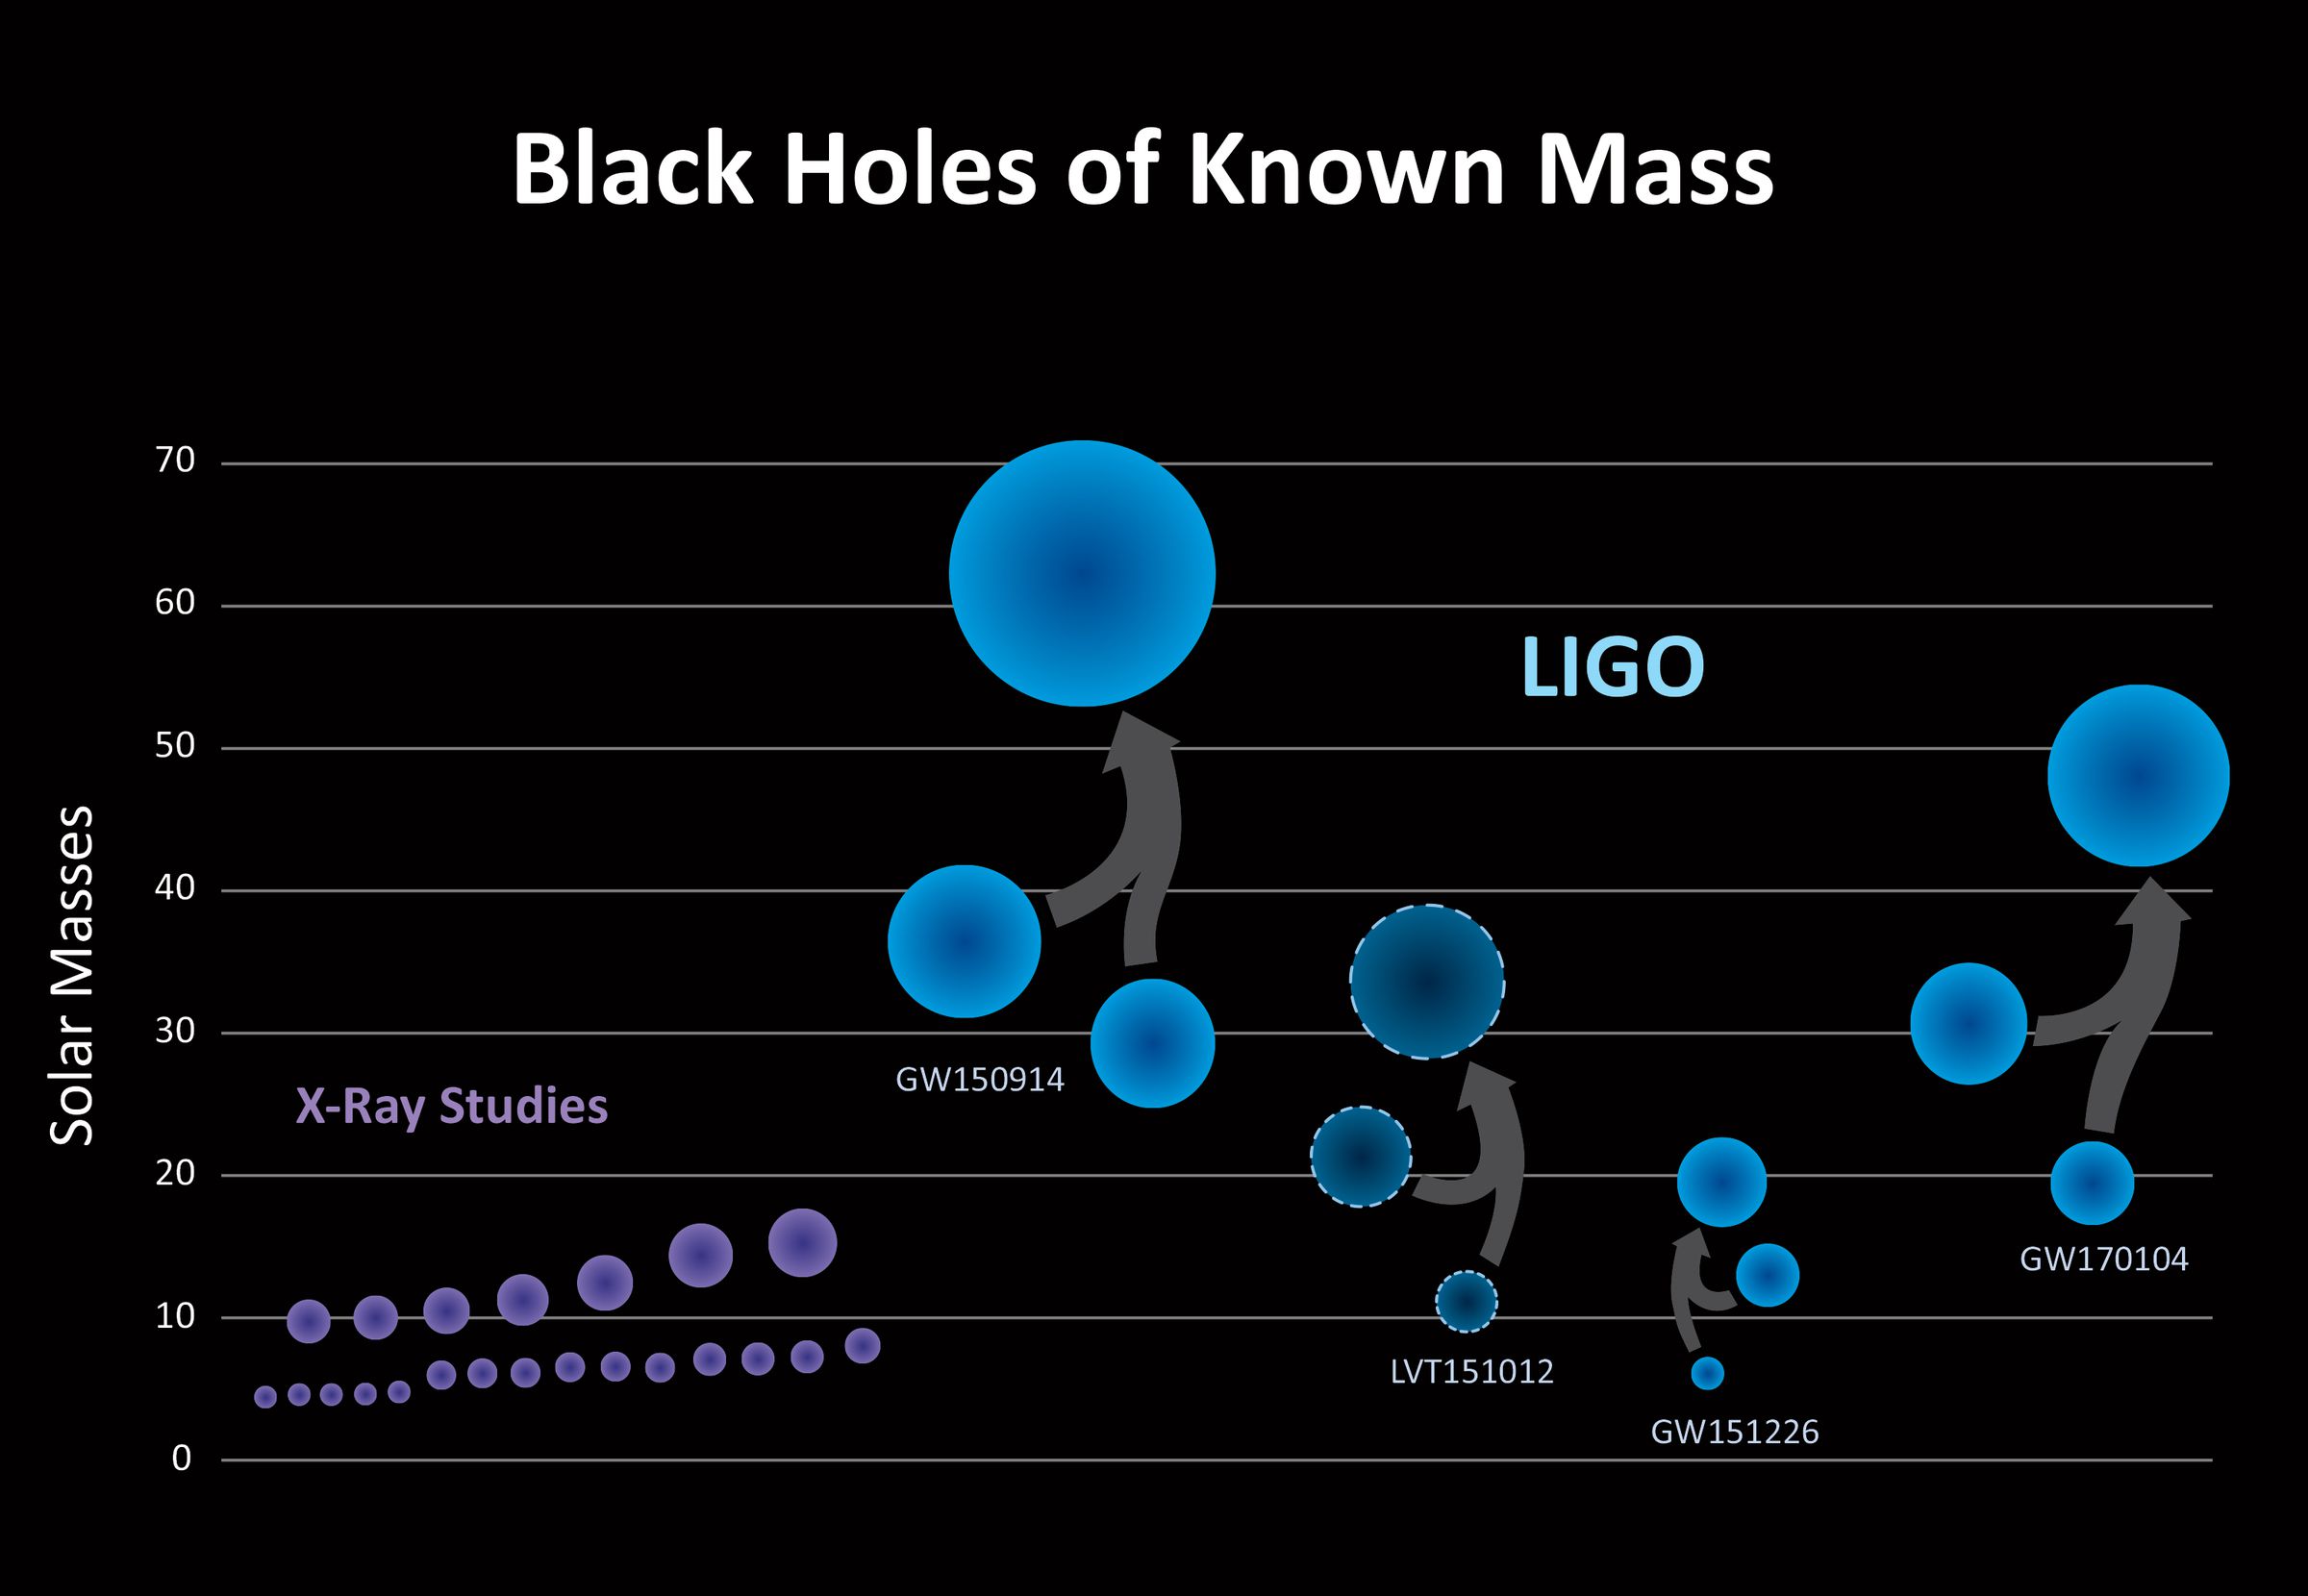 The three confirmed detections by LIGO (GW150914, GW151226, GW170104), and one lower-confidence detection (LVT151012). Many of these black holes are larger than what people expected.